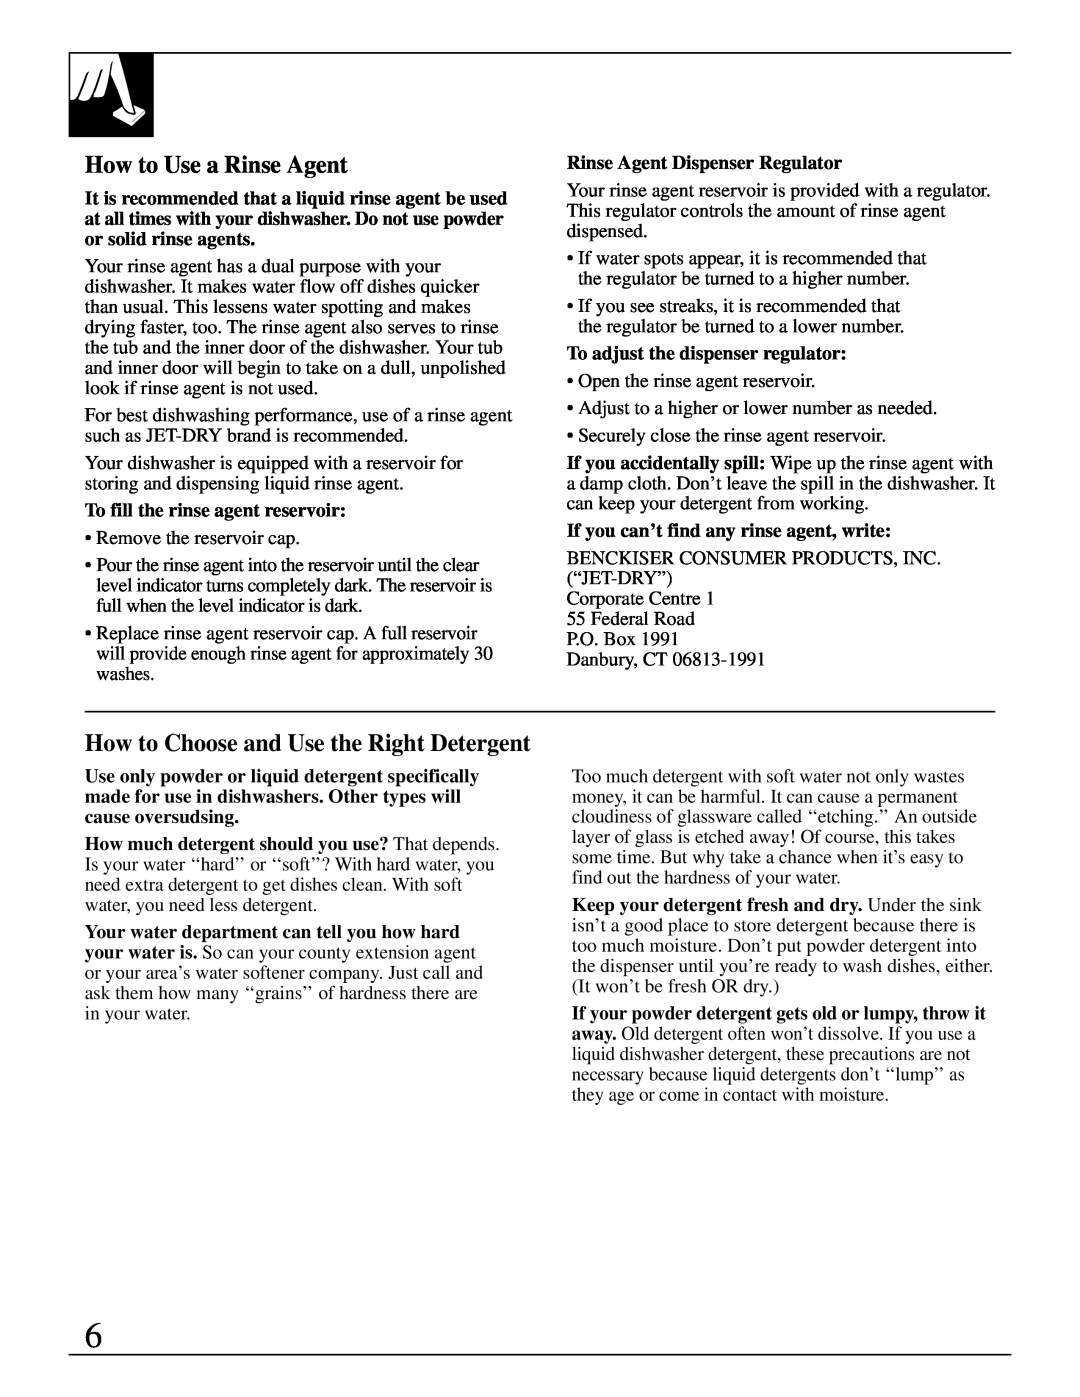 GE Monogram ZBD4600 manual How to Use a Rinse Agent, How to Choose and Use the Right Detergent 